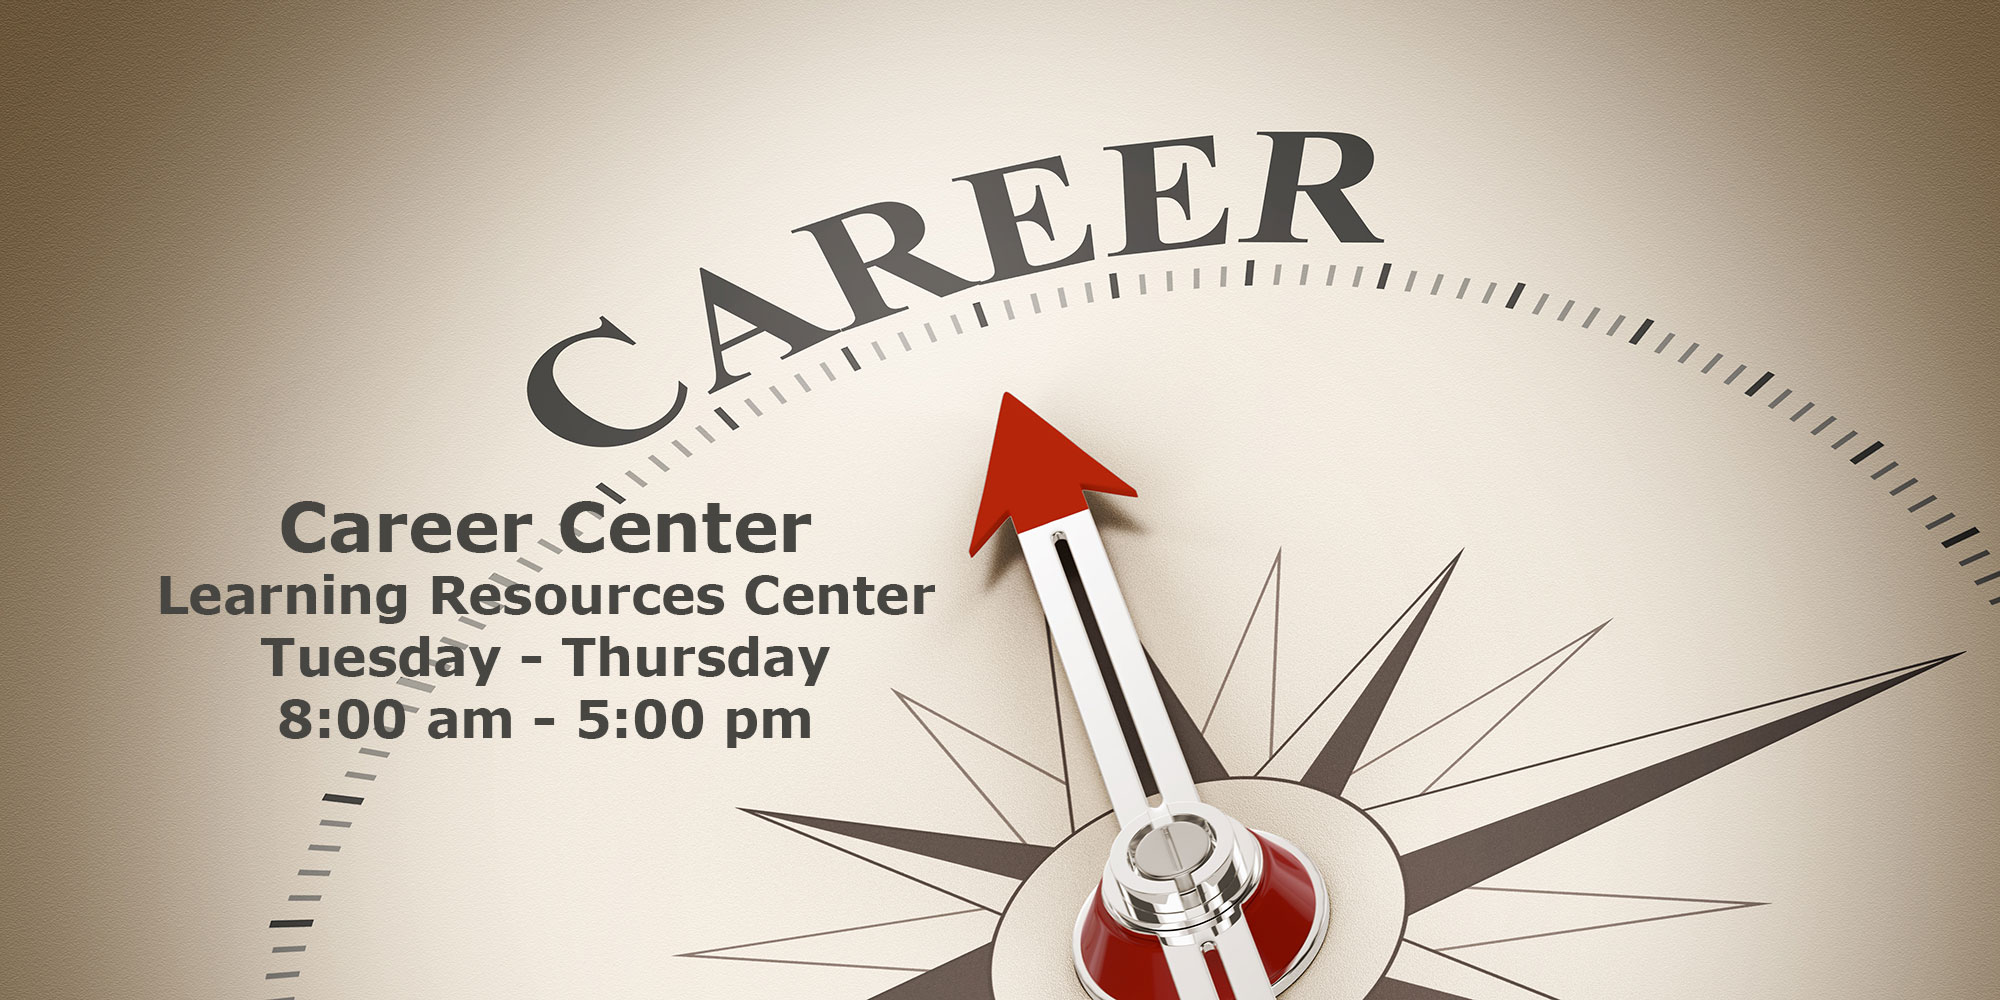 Career Center. Learning Resources Center (LRC 3).  Tuesday - Thursday 8:00 am - 5:00 pm.